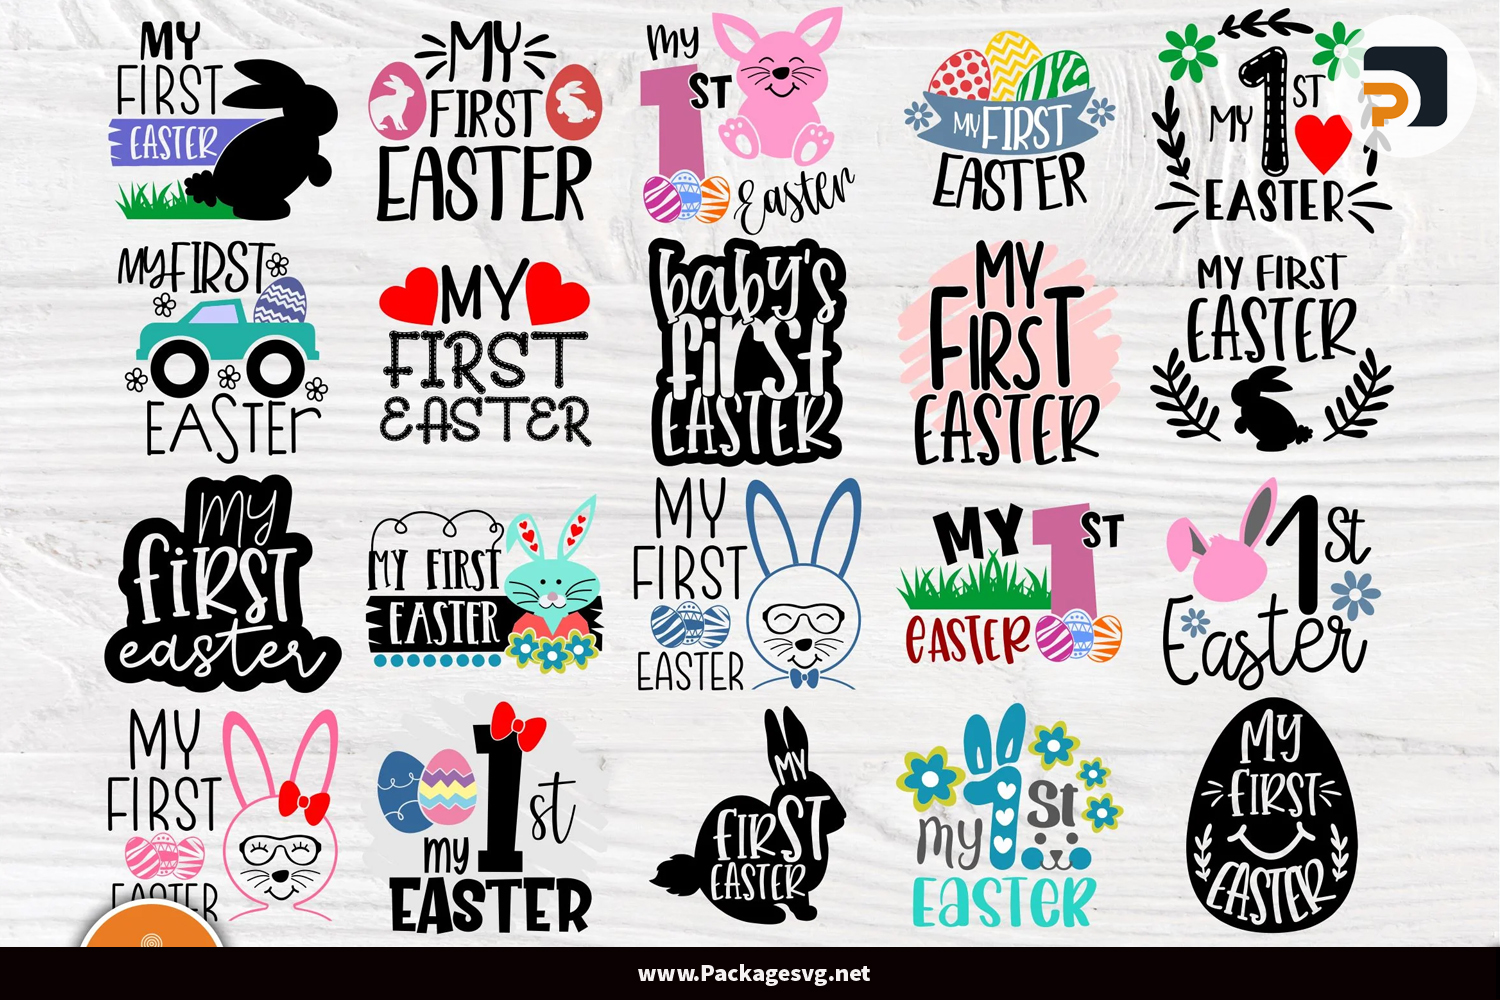 My First Easter SVG Bundle